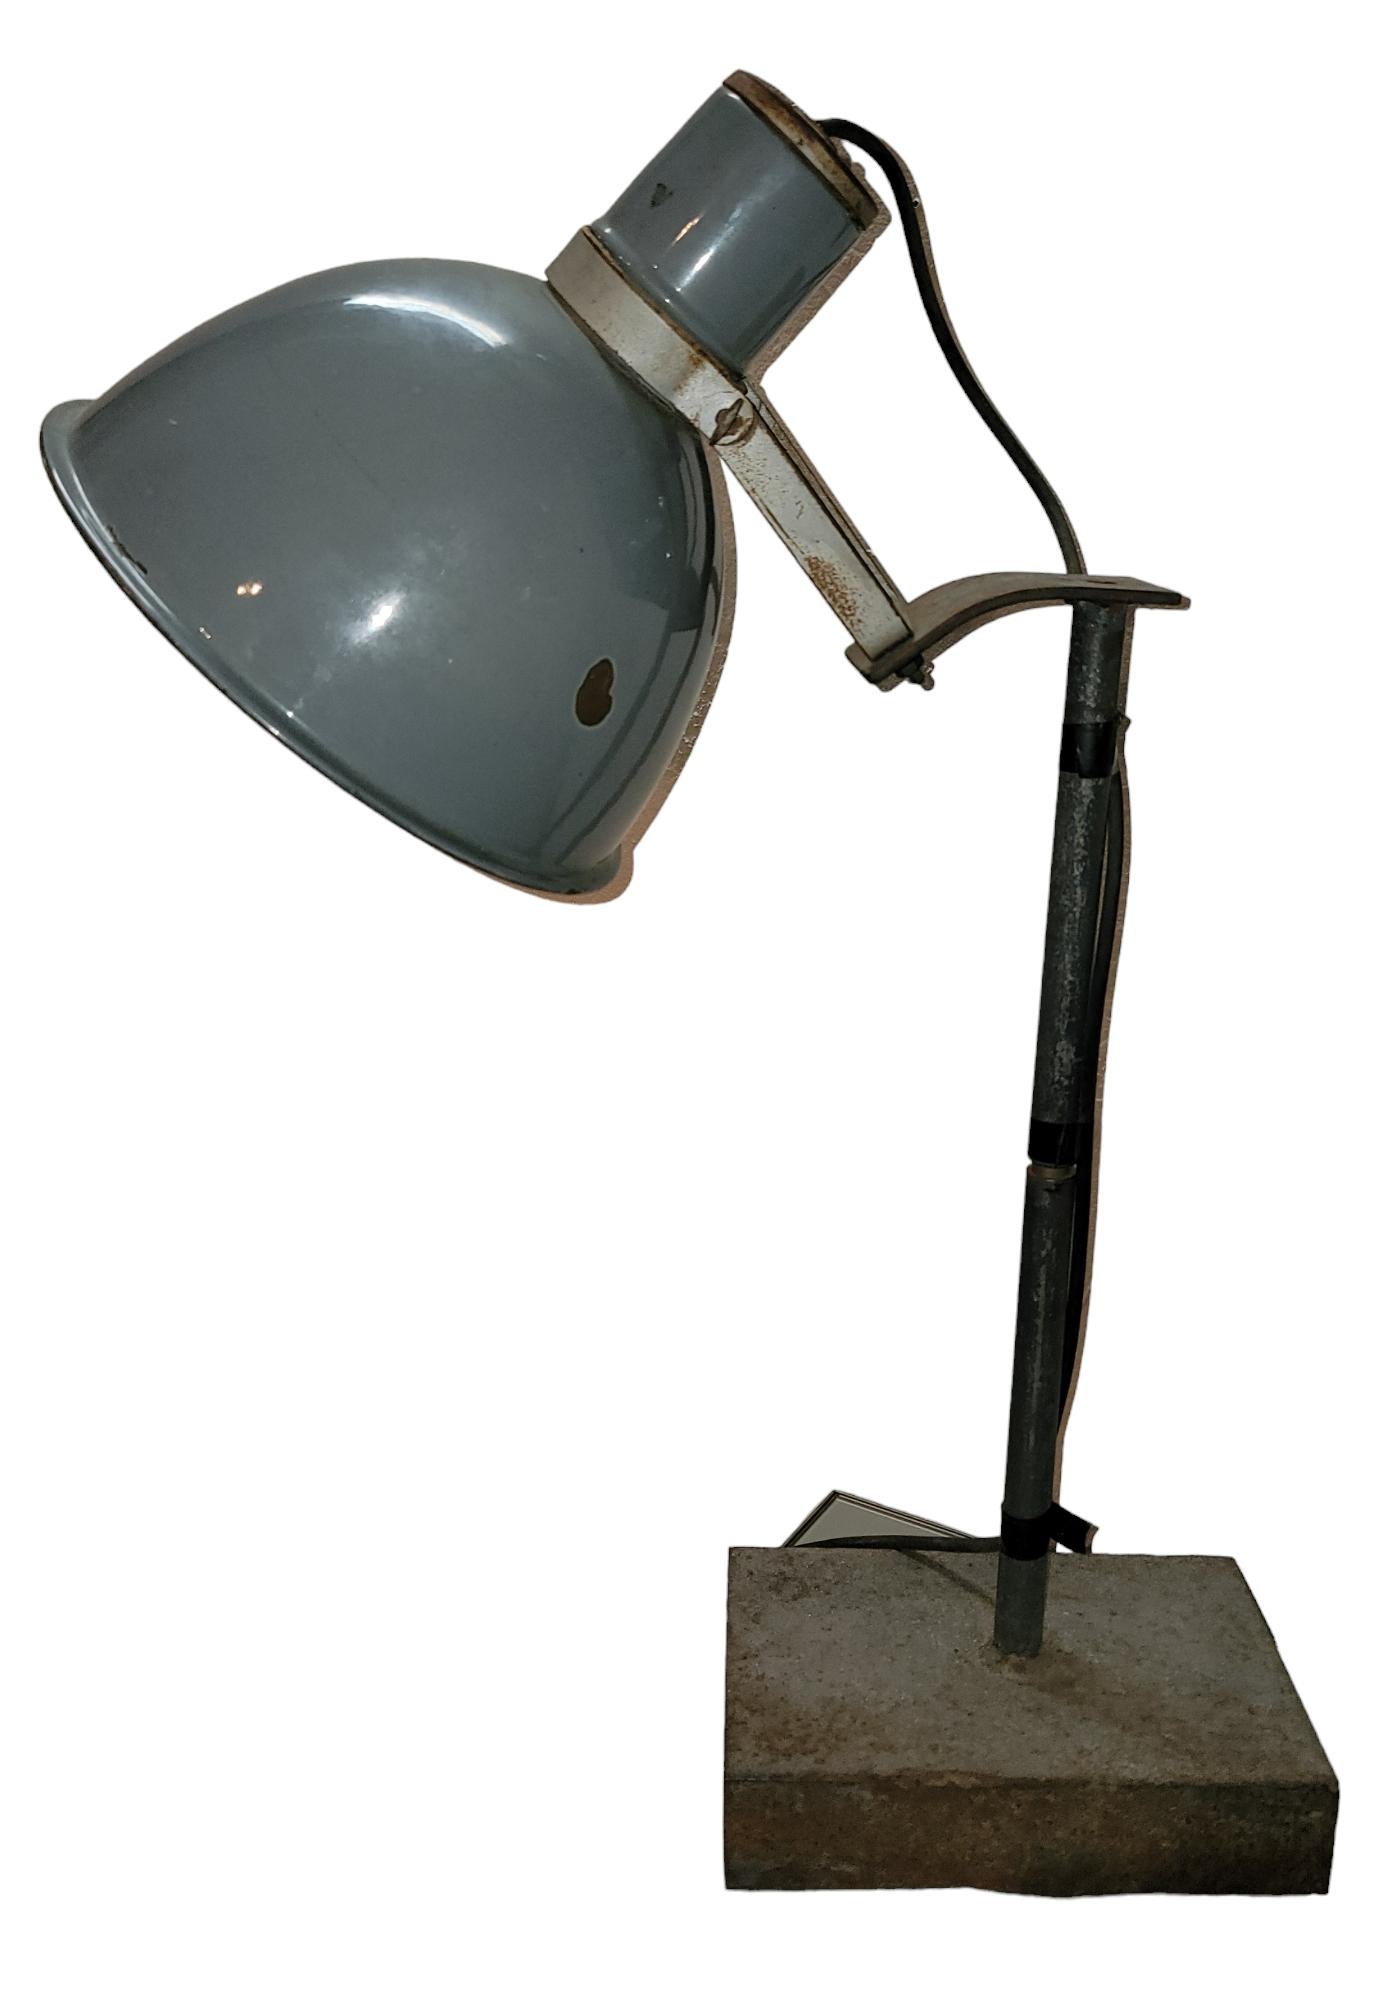 Industrial Metal Table Lamp with heavy metal base. The tall stem is metal and the top shade is fixed to the stem and is adjustable and  is a thin metal.  measures 27h x 20w x 6d